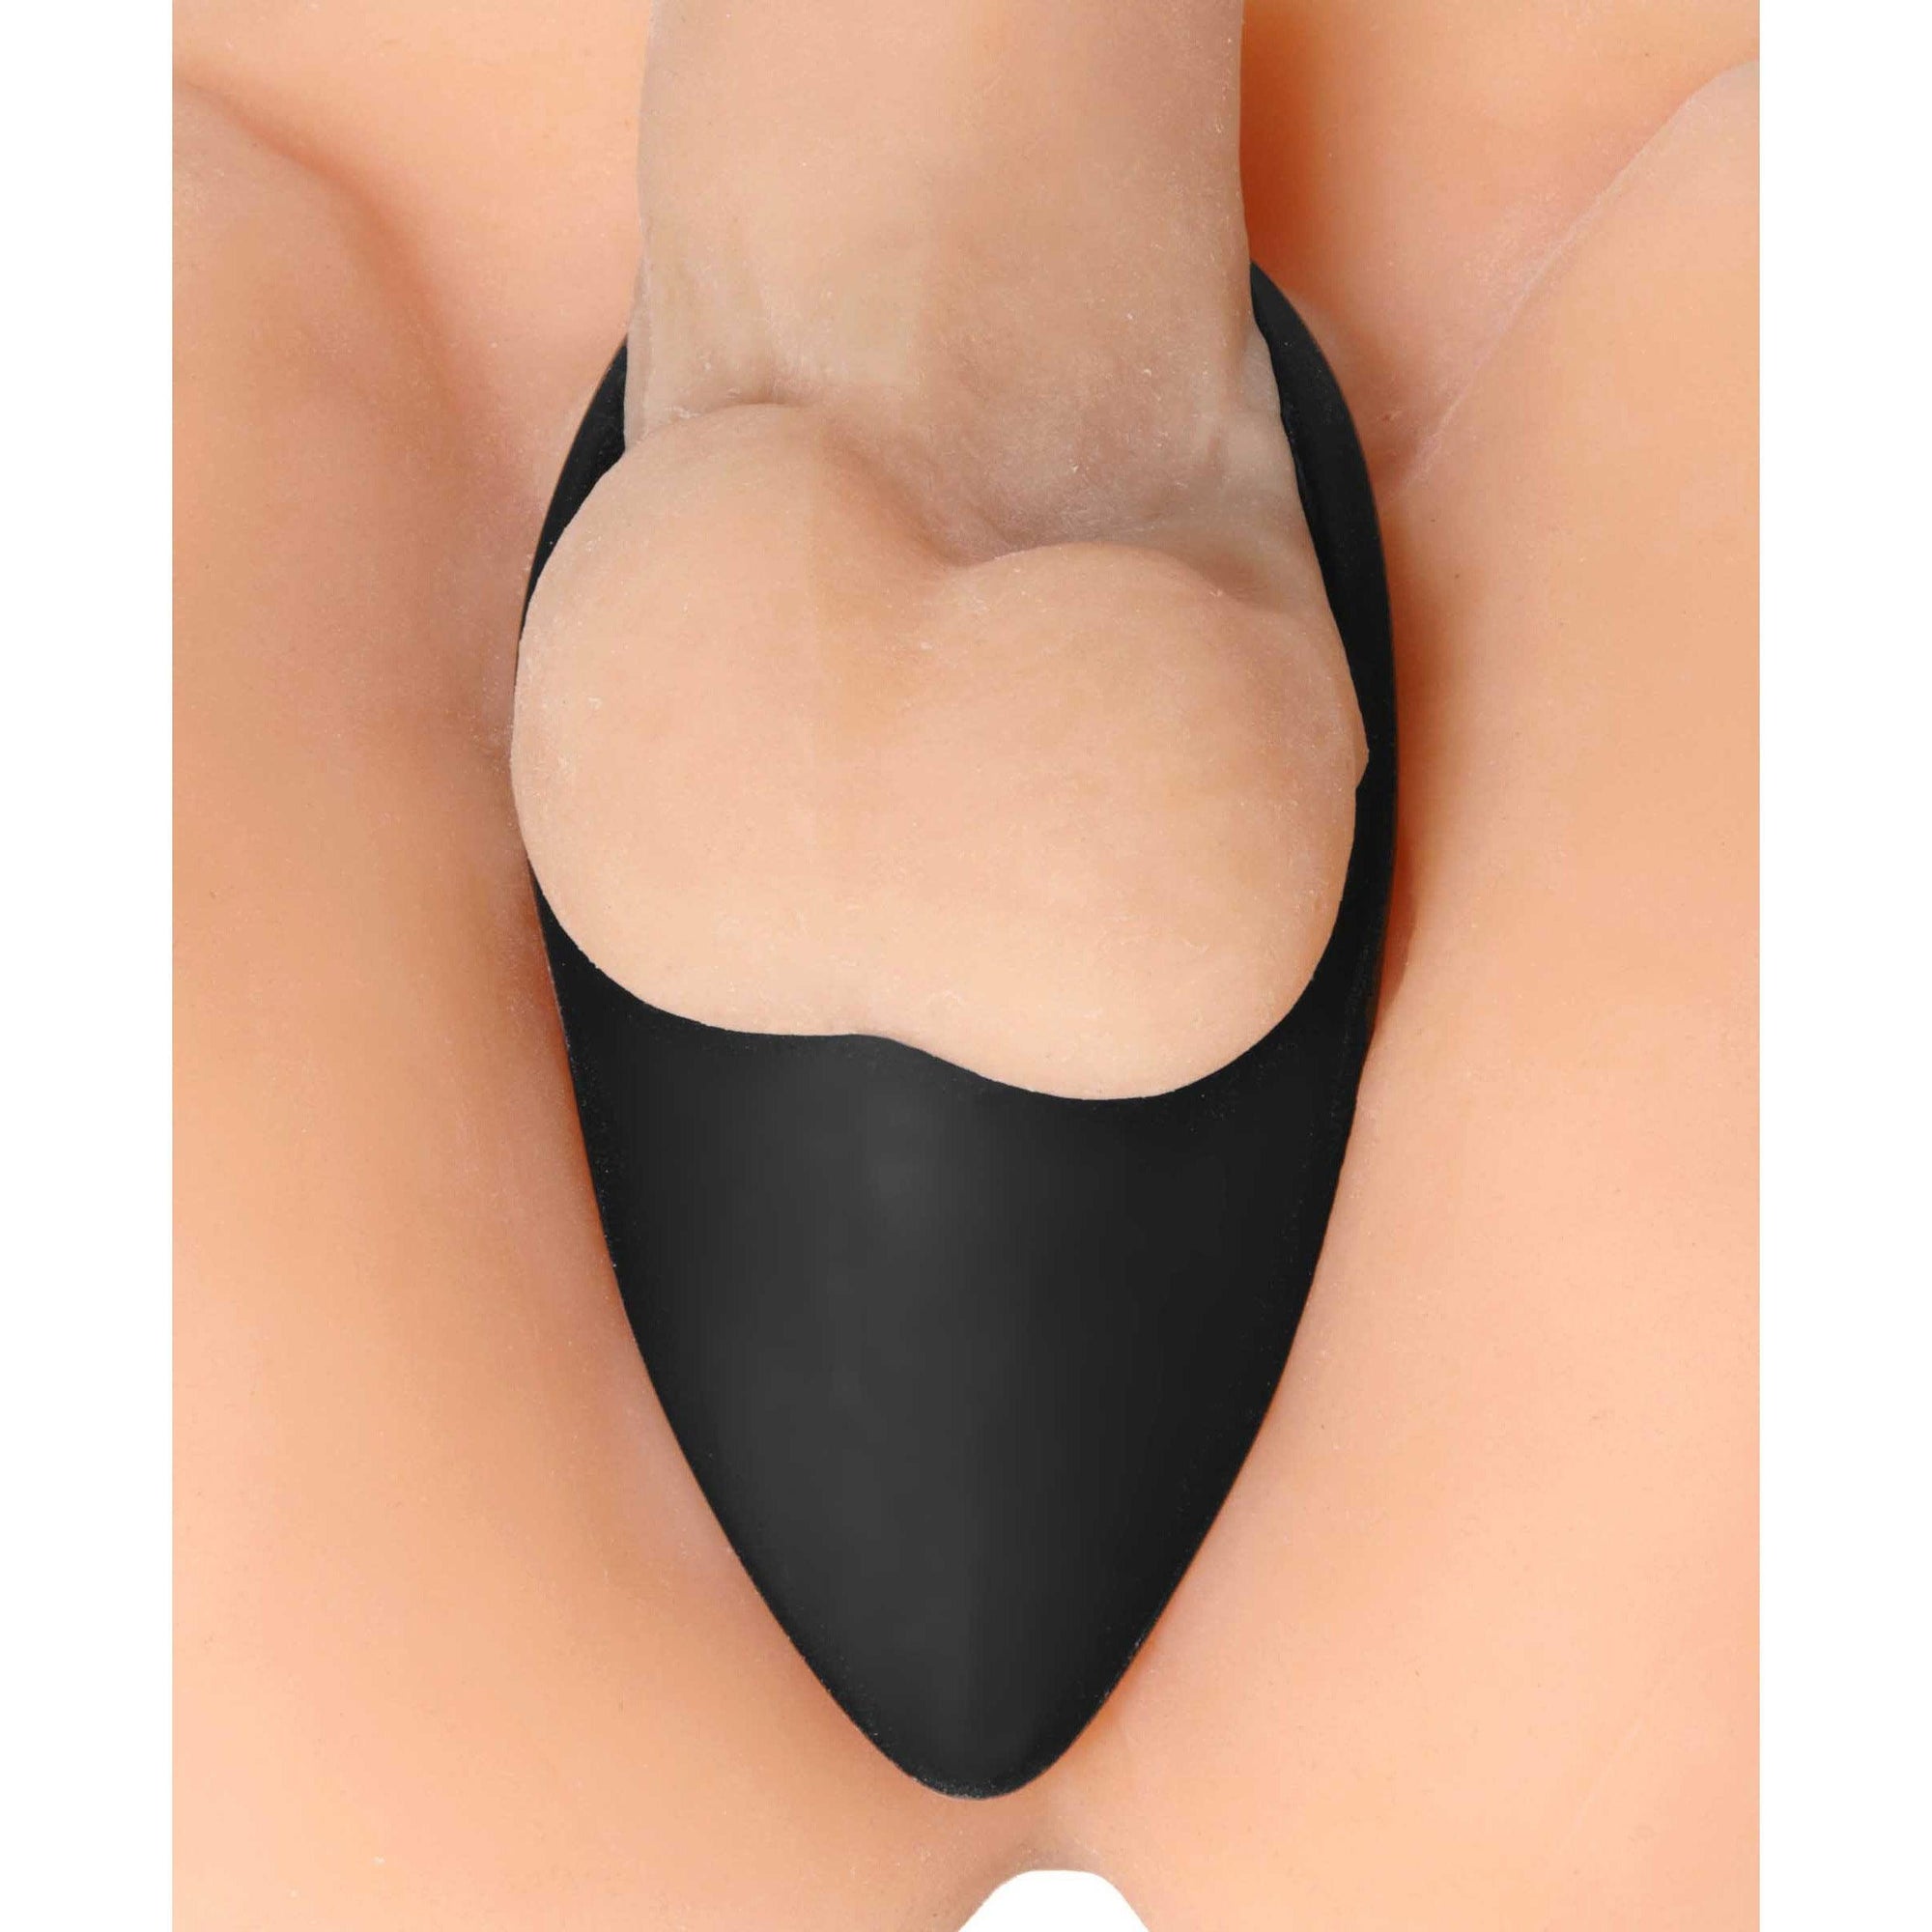 Taint Teaser Silicone Cock Ring and Taint Stimulator - 2 Inch